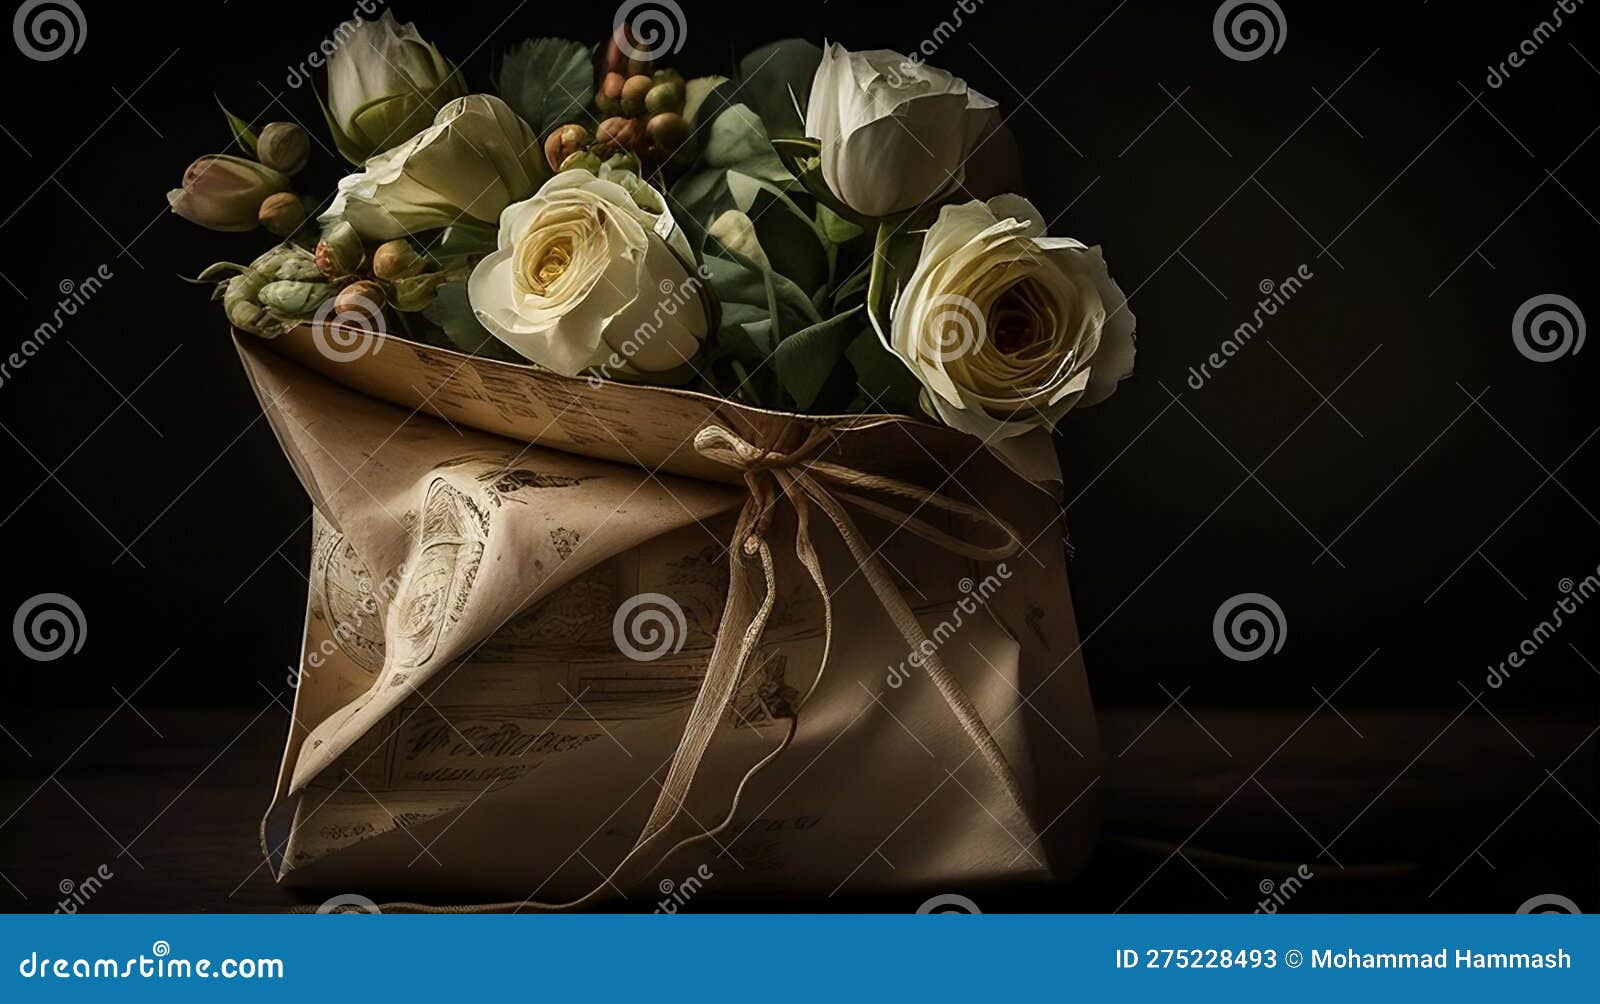 Bouquet of White Roses Wrapped in a Paper Bag, Made with